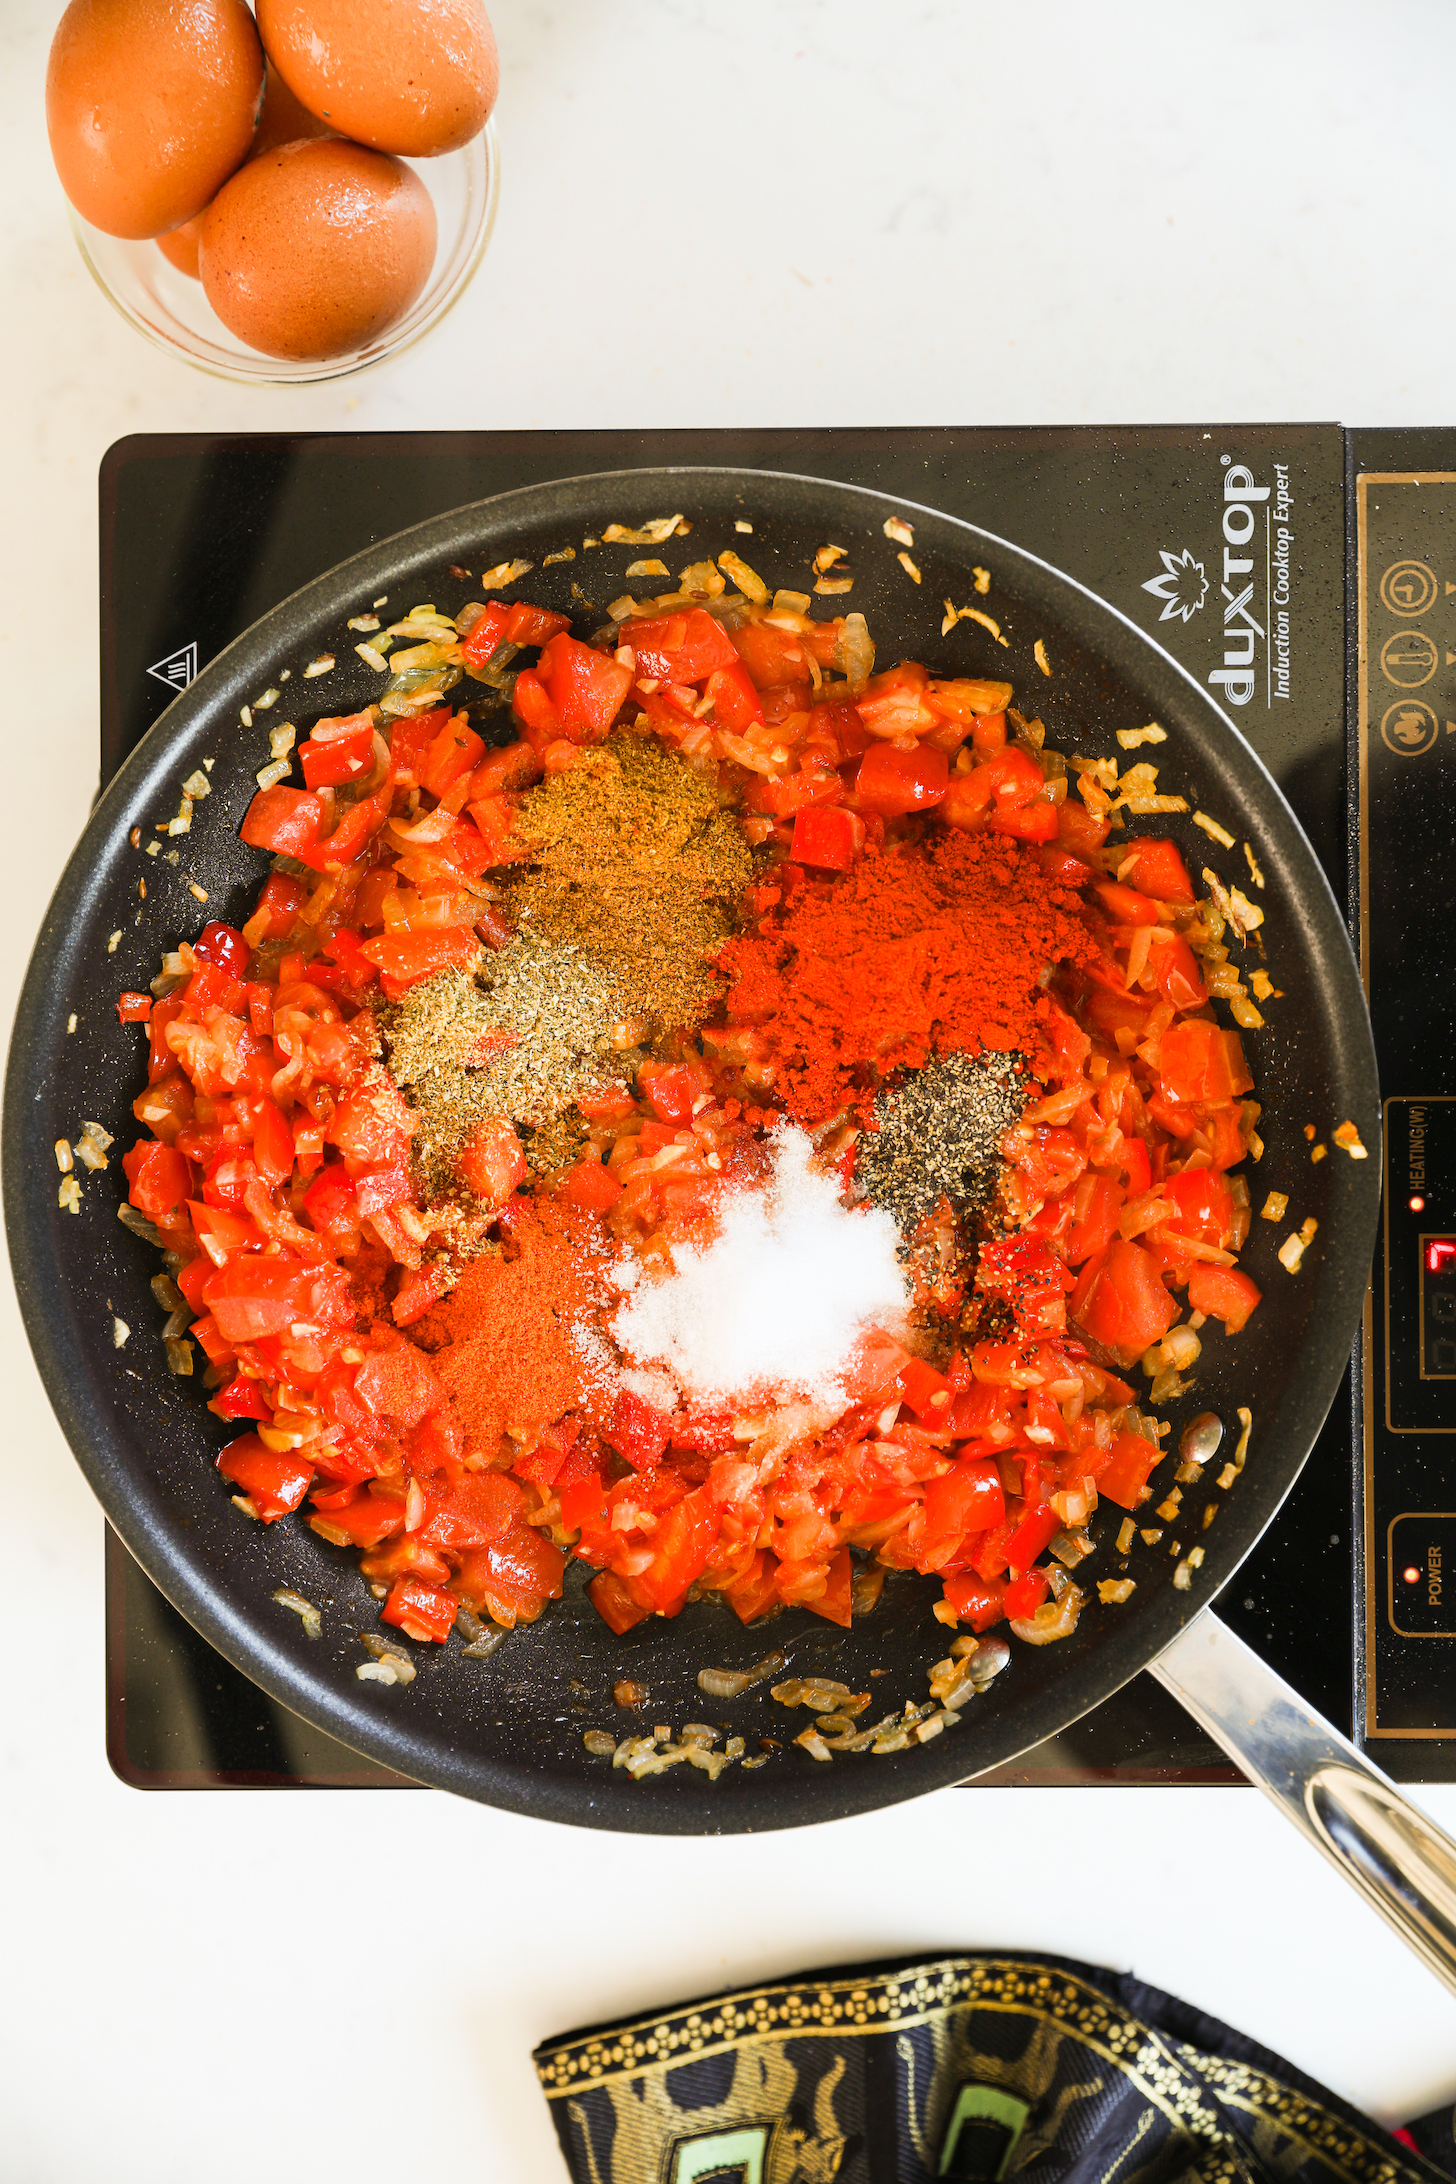 Image of a pan on a portable stove with cooked tomatoes and peppers inside. There are spices on top, and you can see a bowl of eggs nearby.